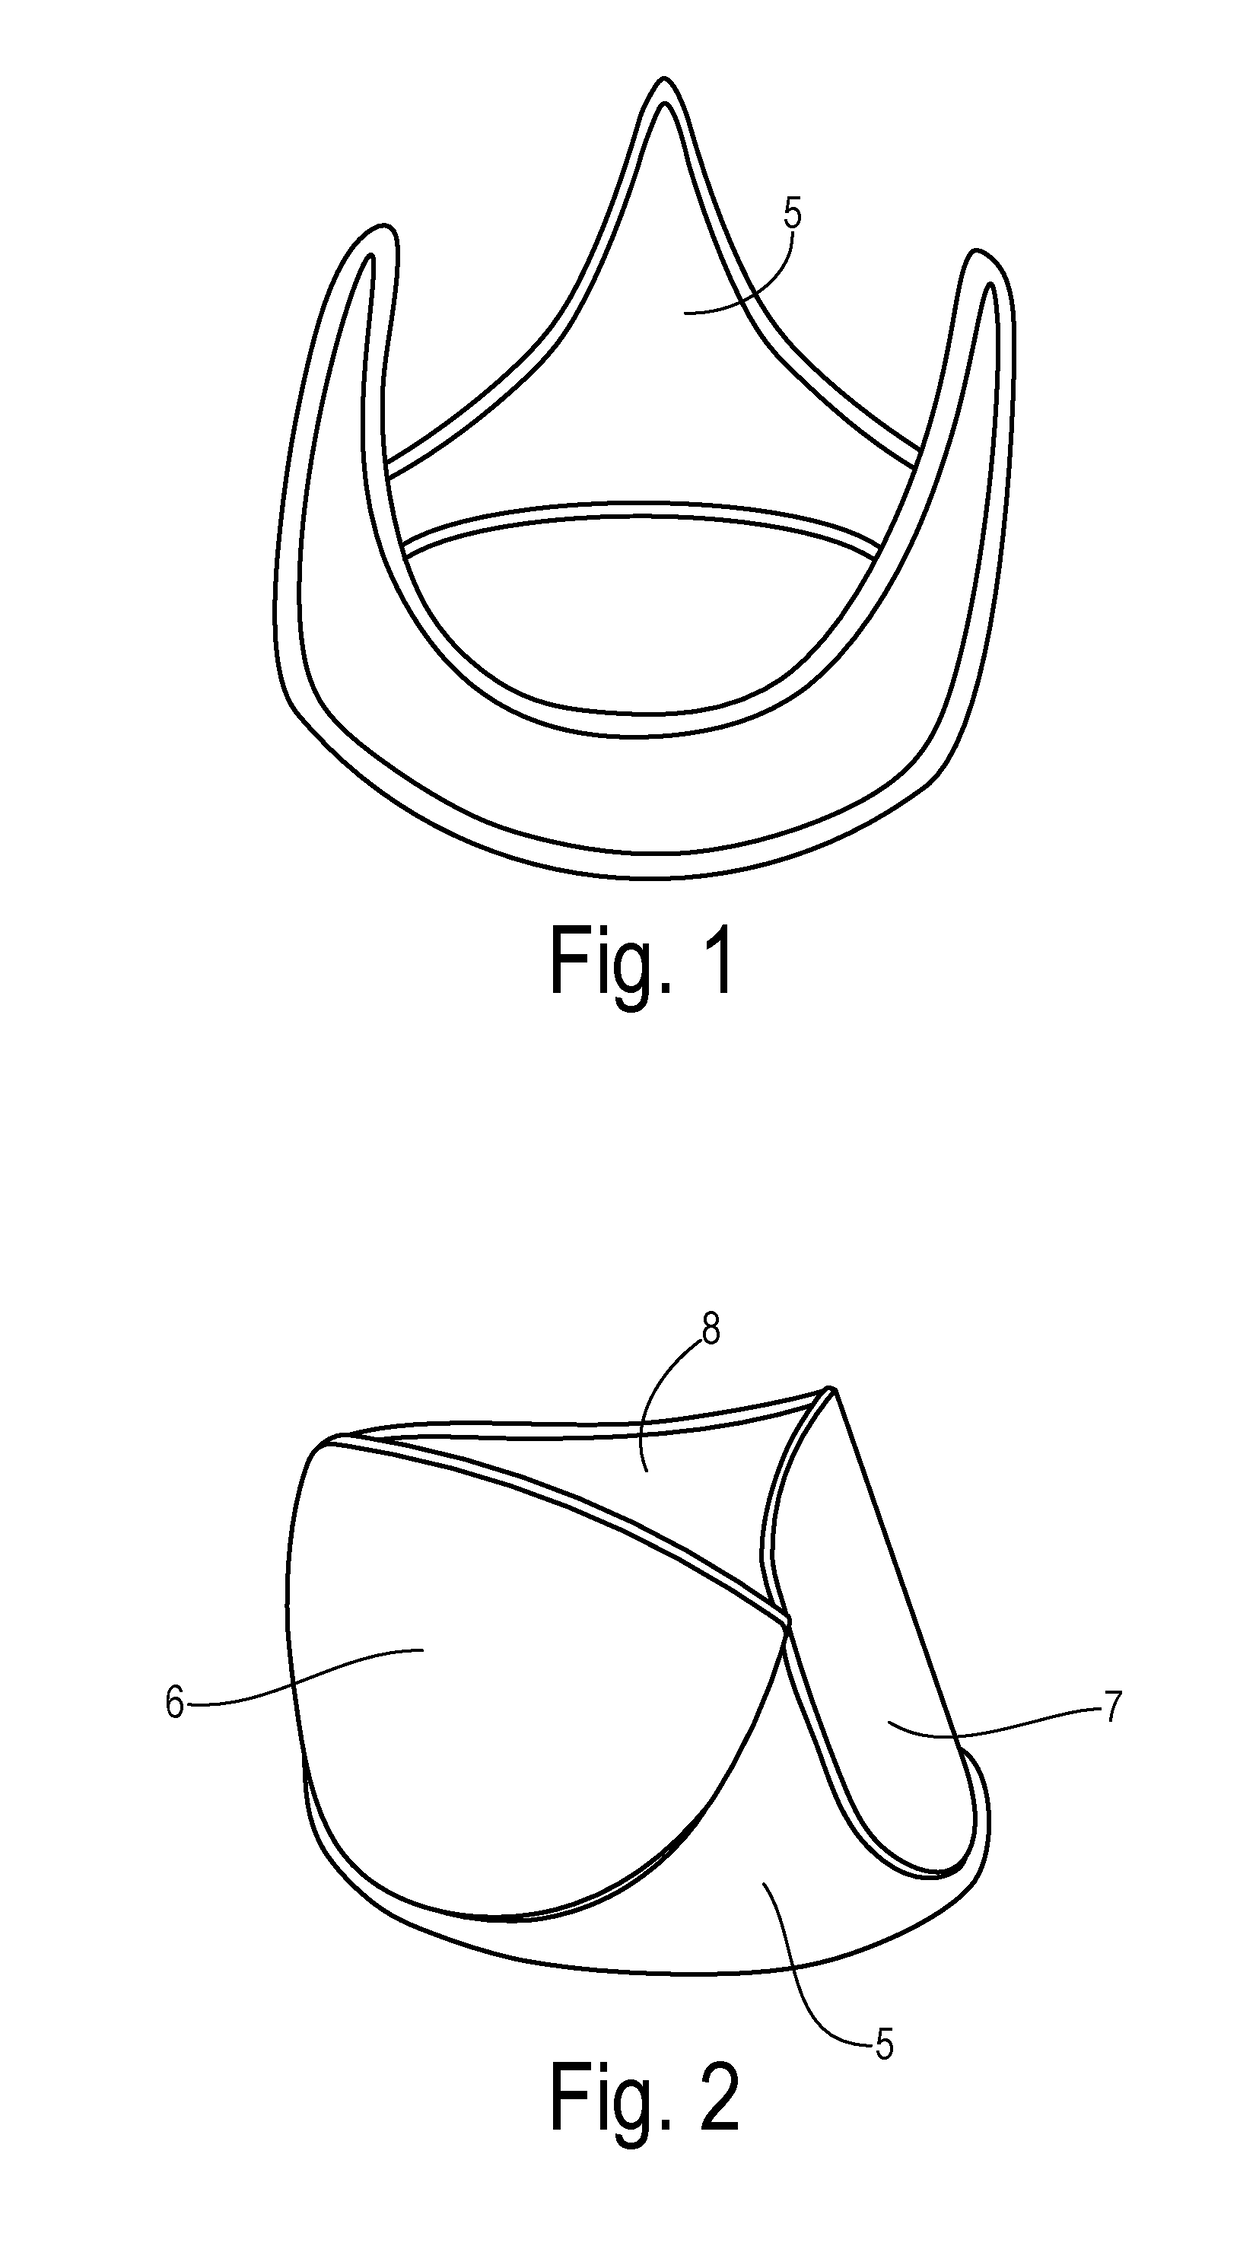 Temporary Disposable Scaffold Stand and Tools to Facilitate Reconstructive Valve Surgery